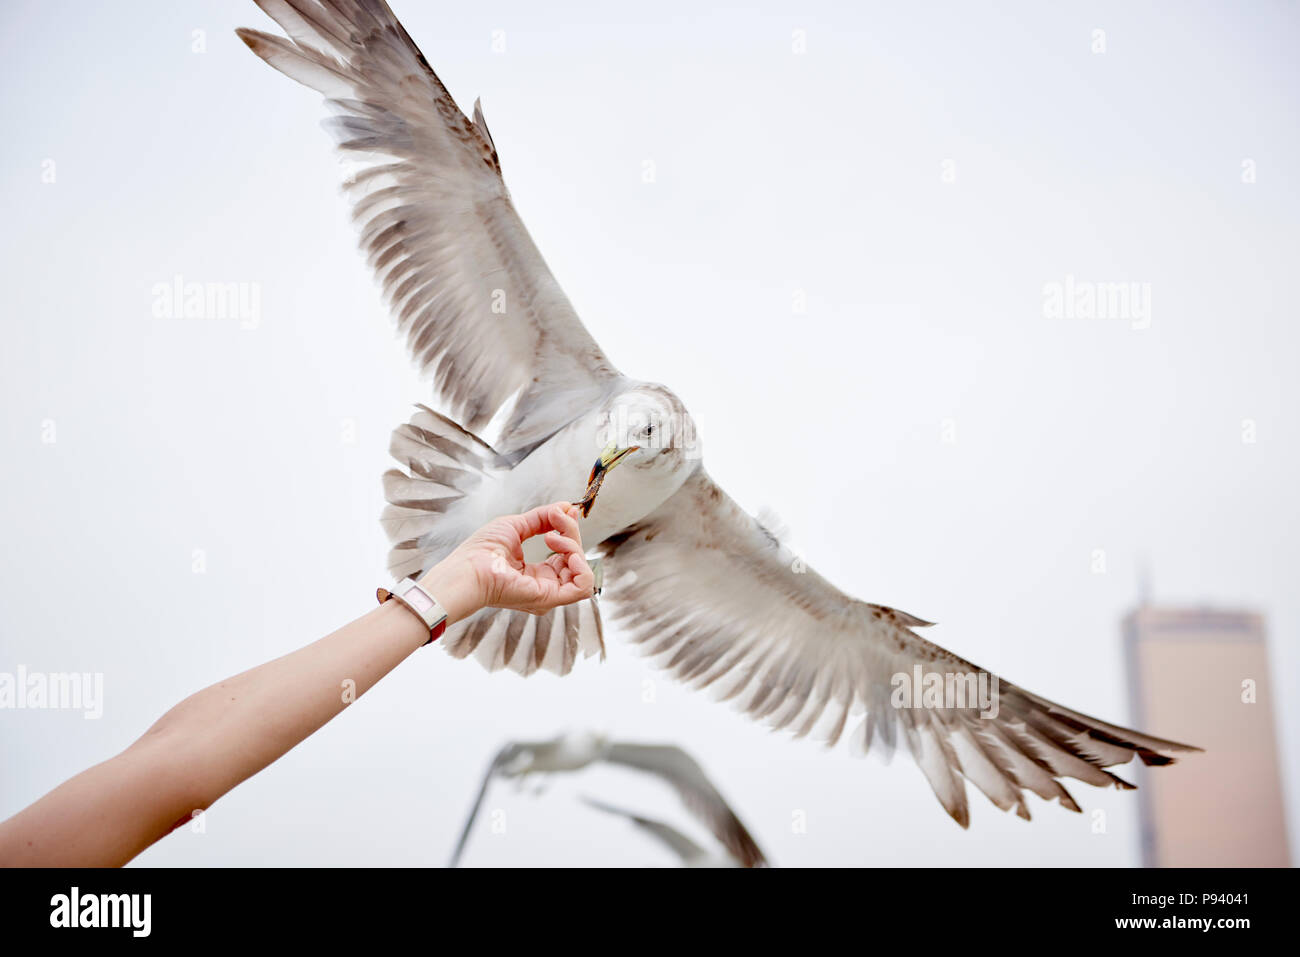 Detail of a person's hand holding a piece of dried fish and a Seagull feeding on it with its wingspan fully spread. Stock Photo